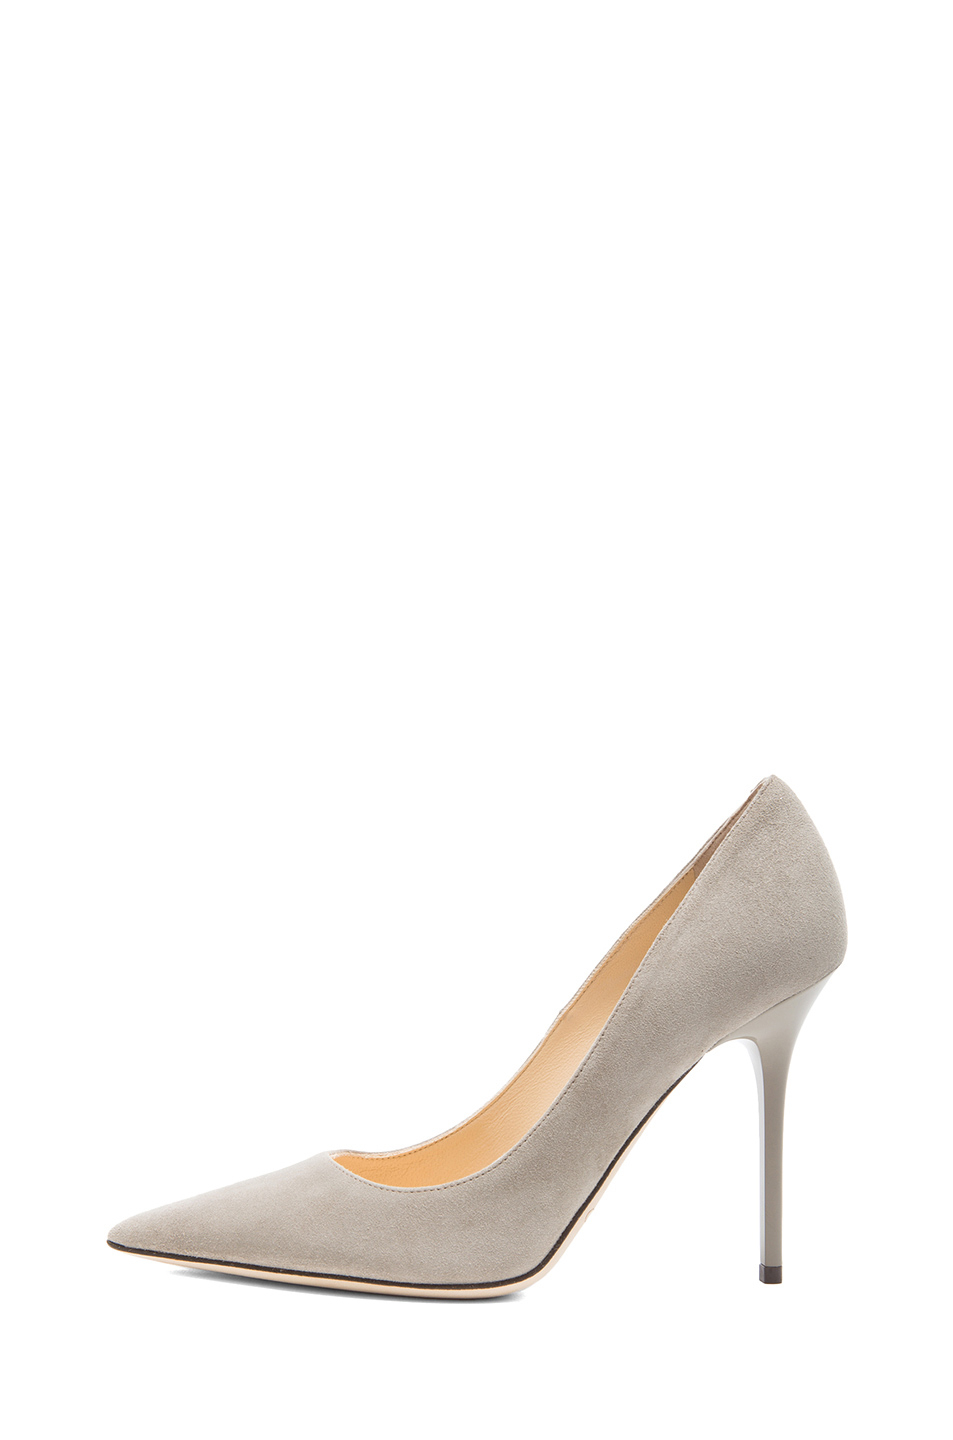 Jimmy Choo Abel Pointed Suede Pumps in Gray (Pebble) | Lyst